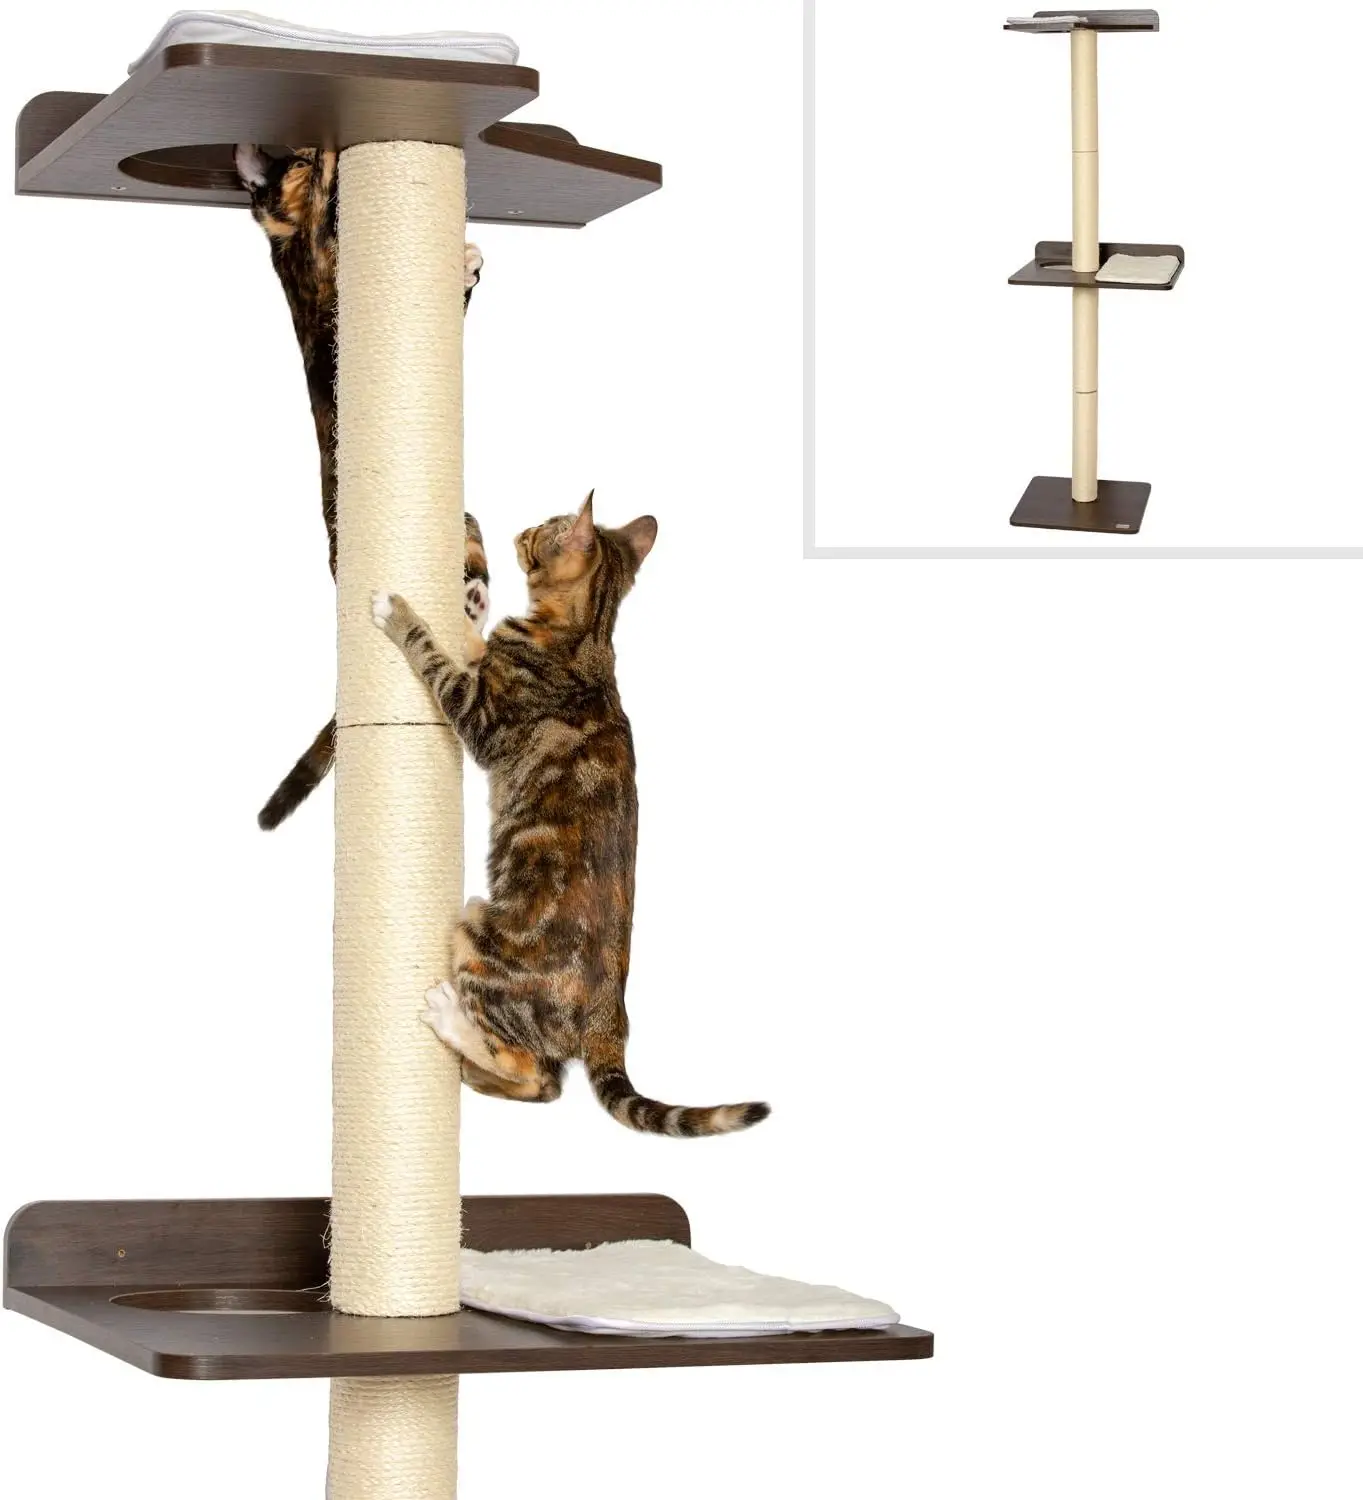 

Ultimate Cat Climbing Tower & Activity Tree. (24 x 20.8 x 76.8 inches (lwh) Tall Sisal Scratching Posts, Modern Mounted cat